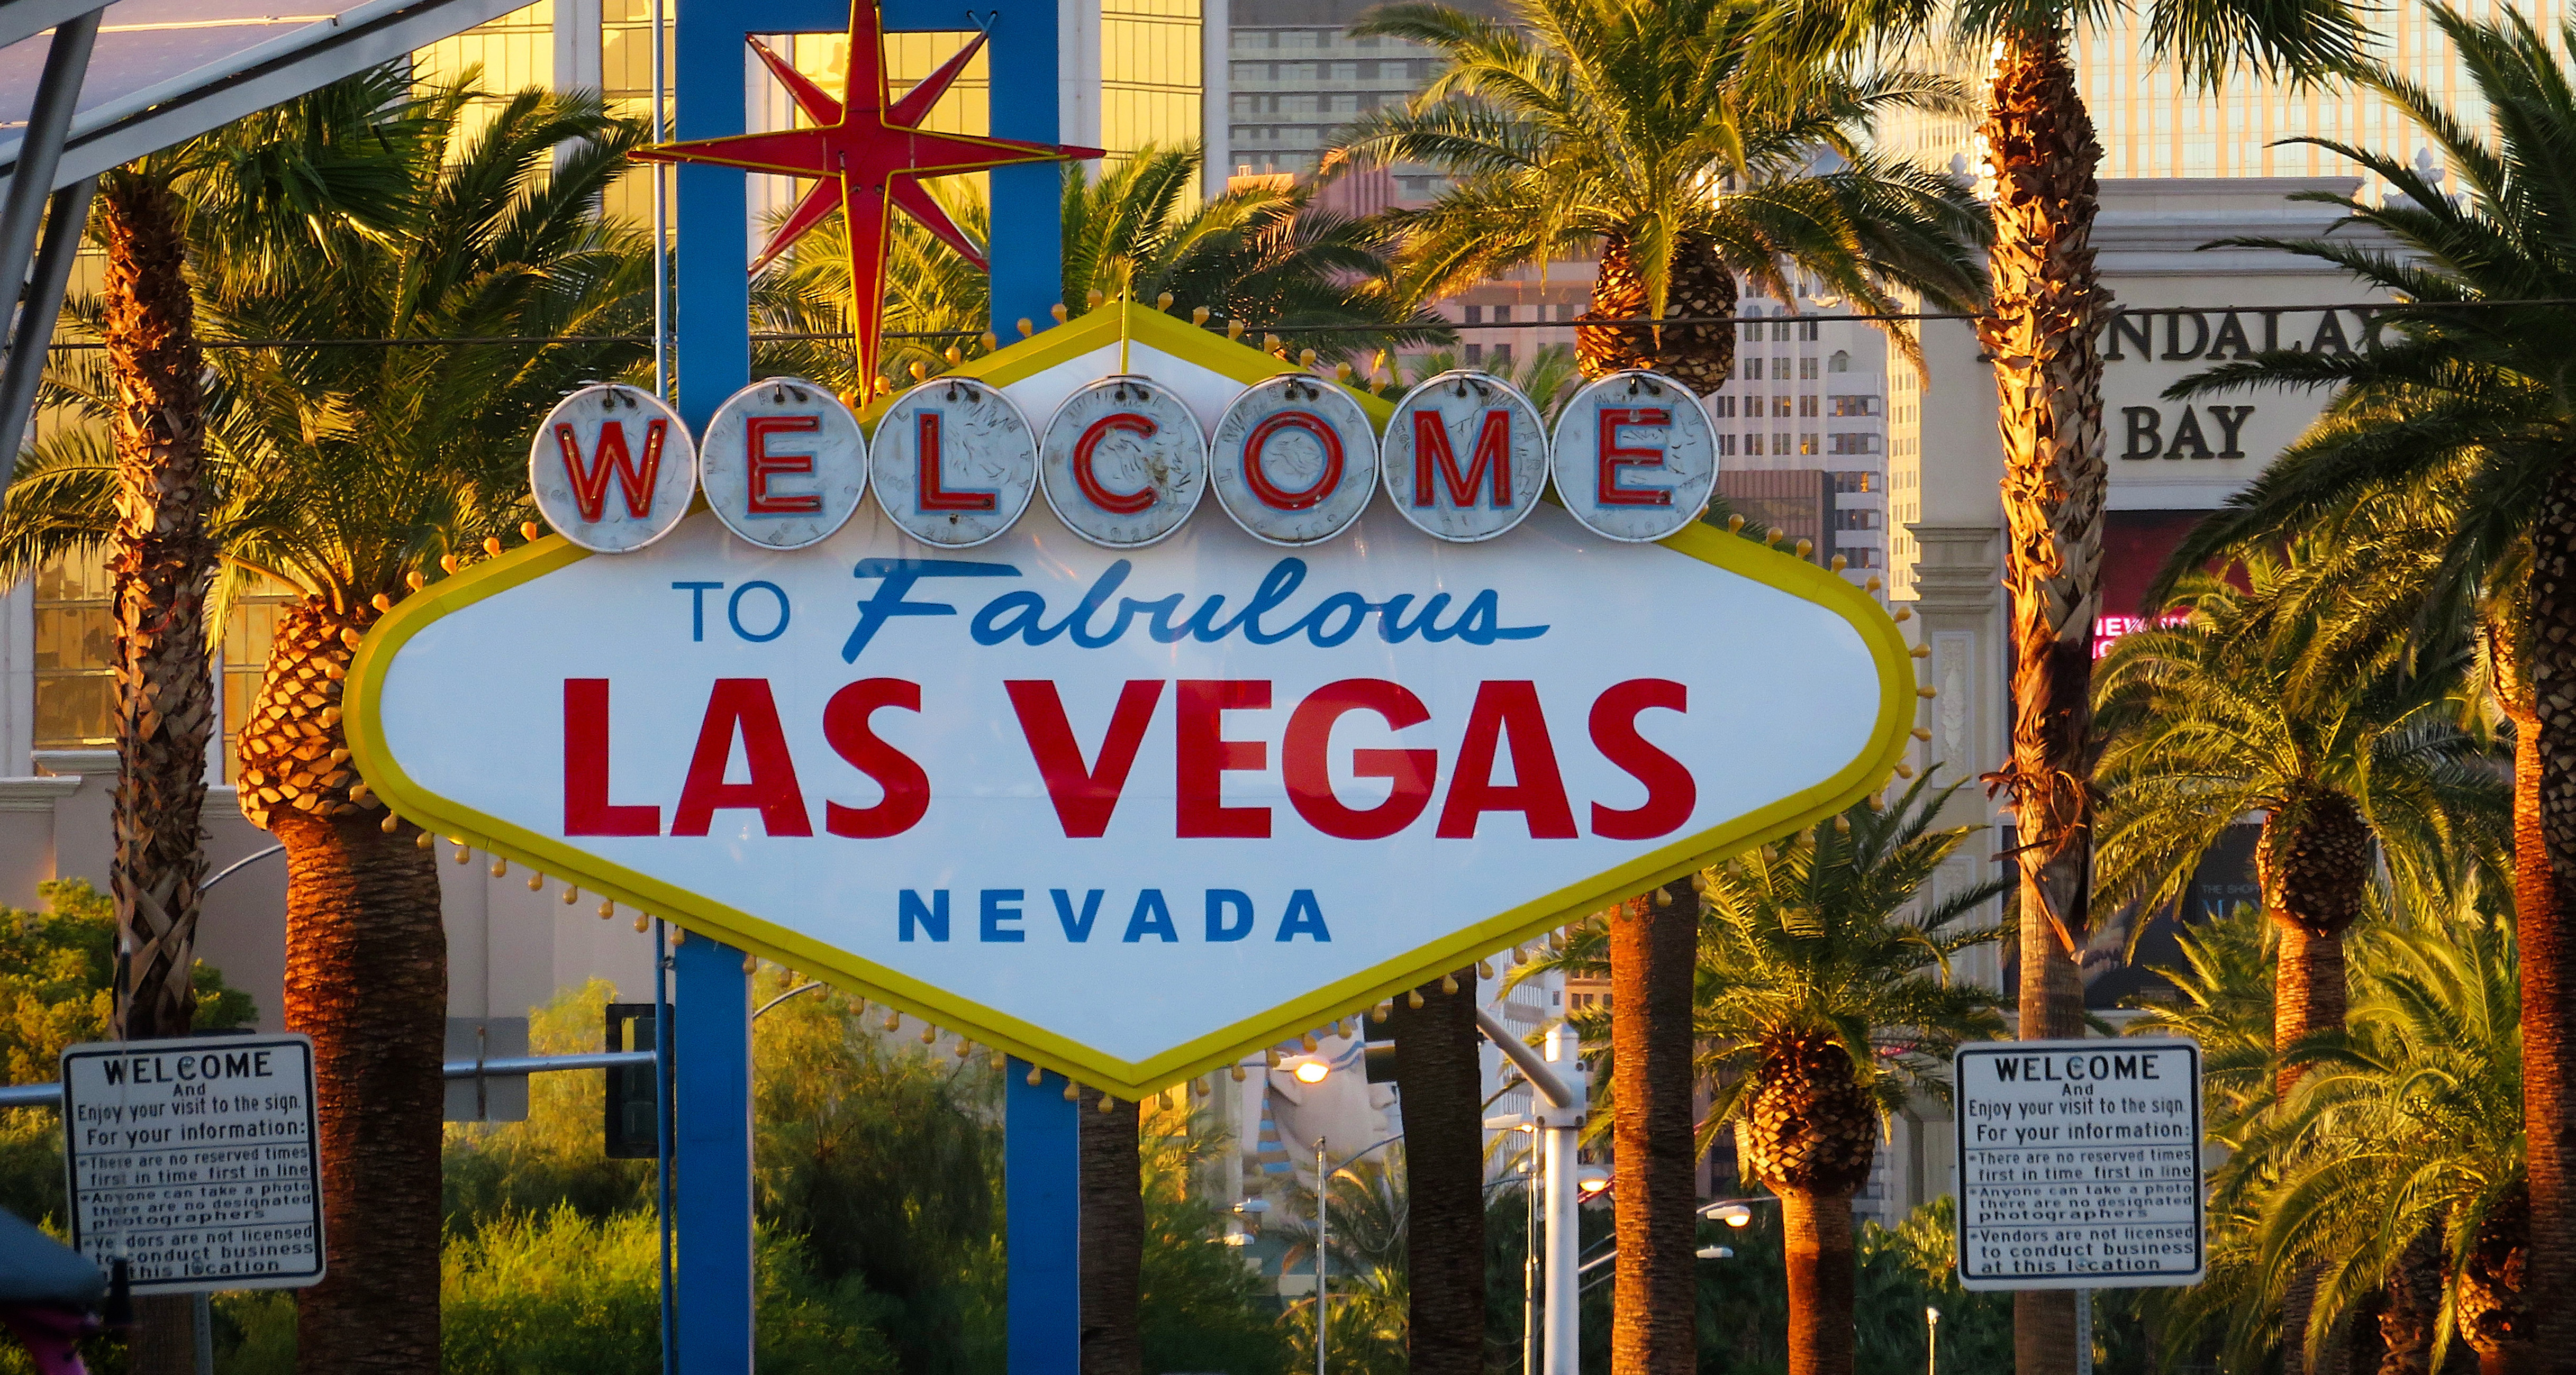 How To Visit The Welcome To Las Vegas Sign